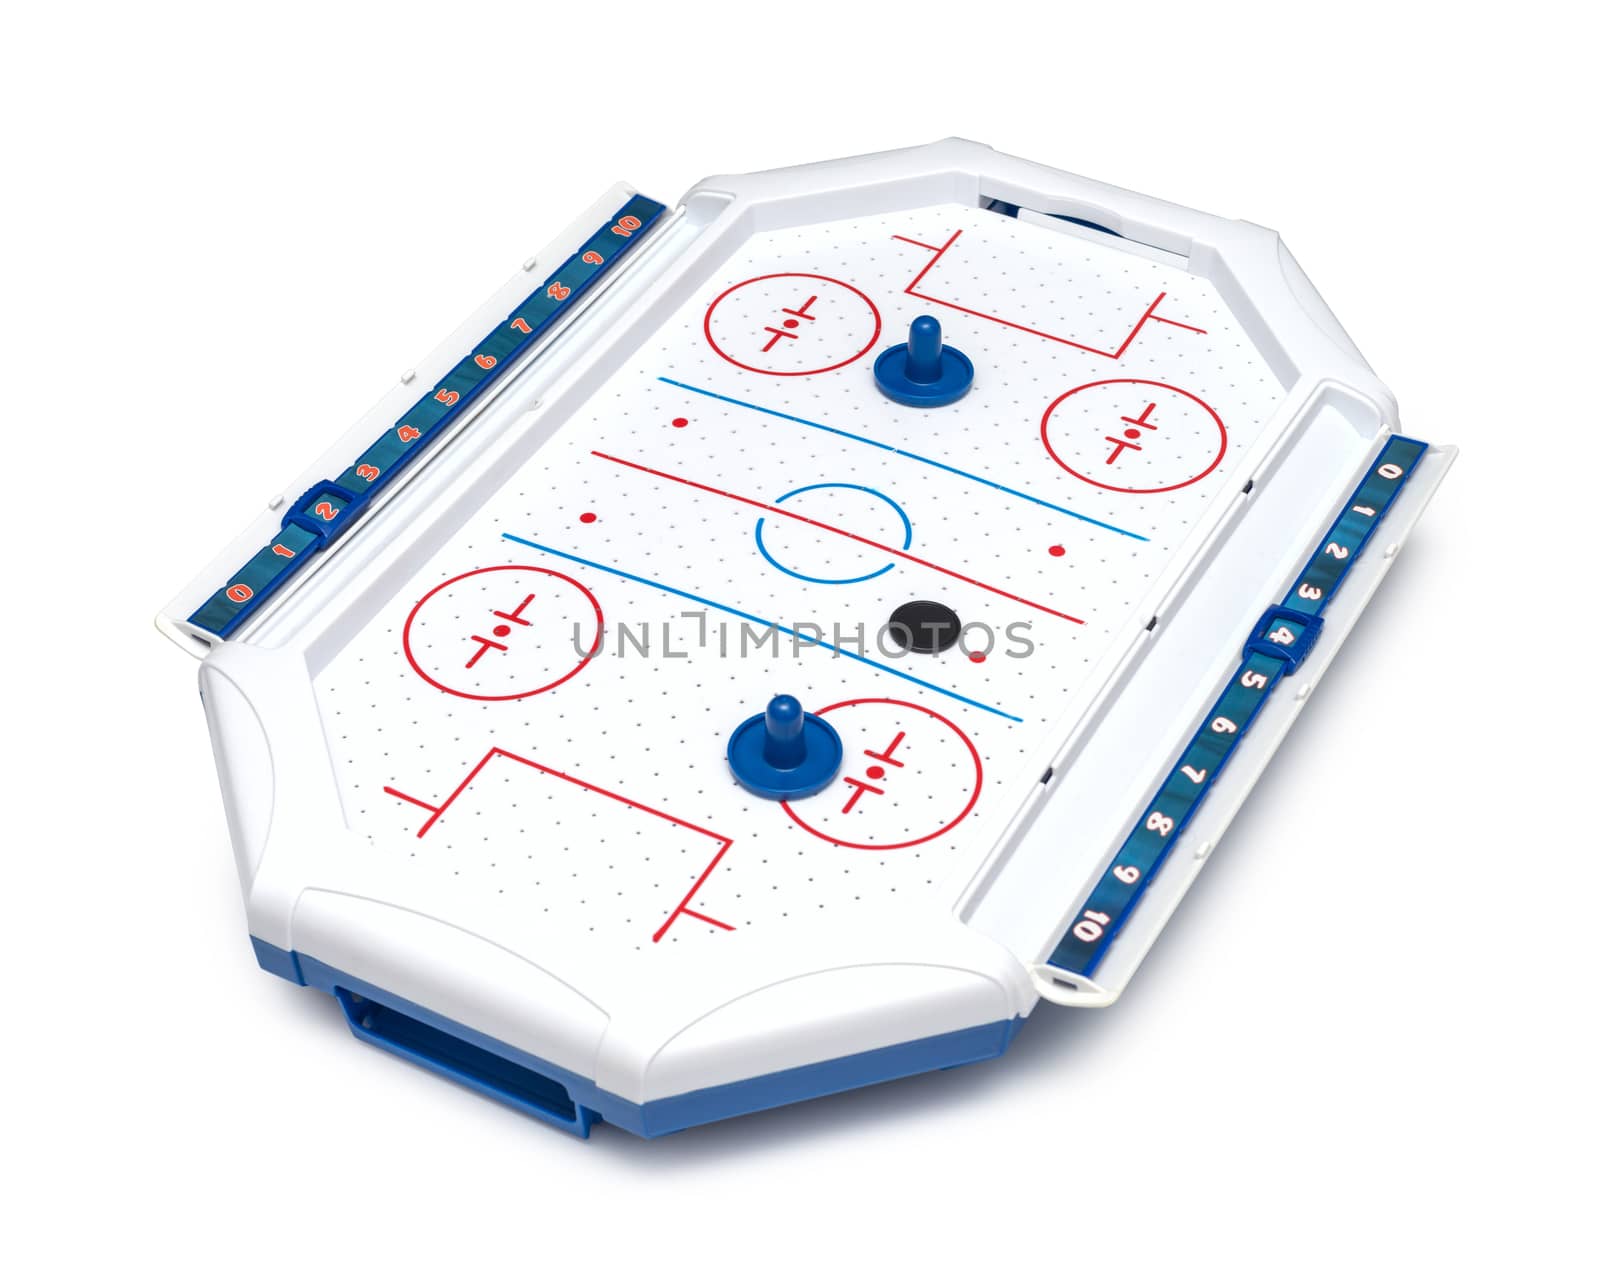 Air Hockey game board and pieces